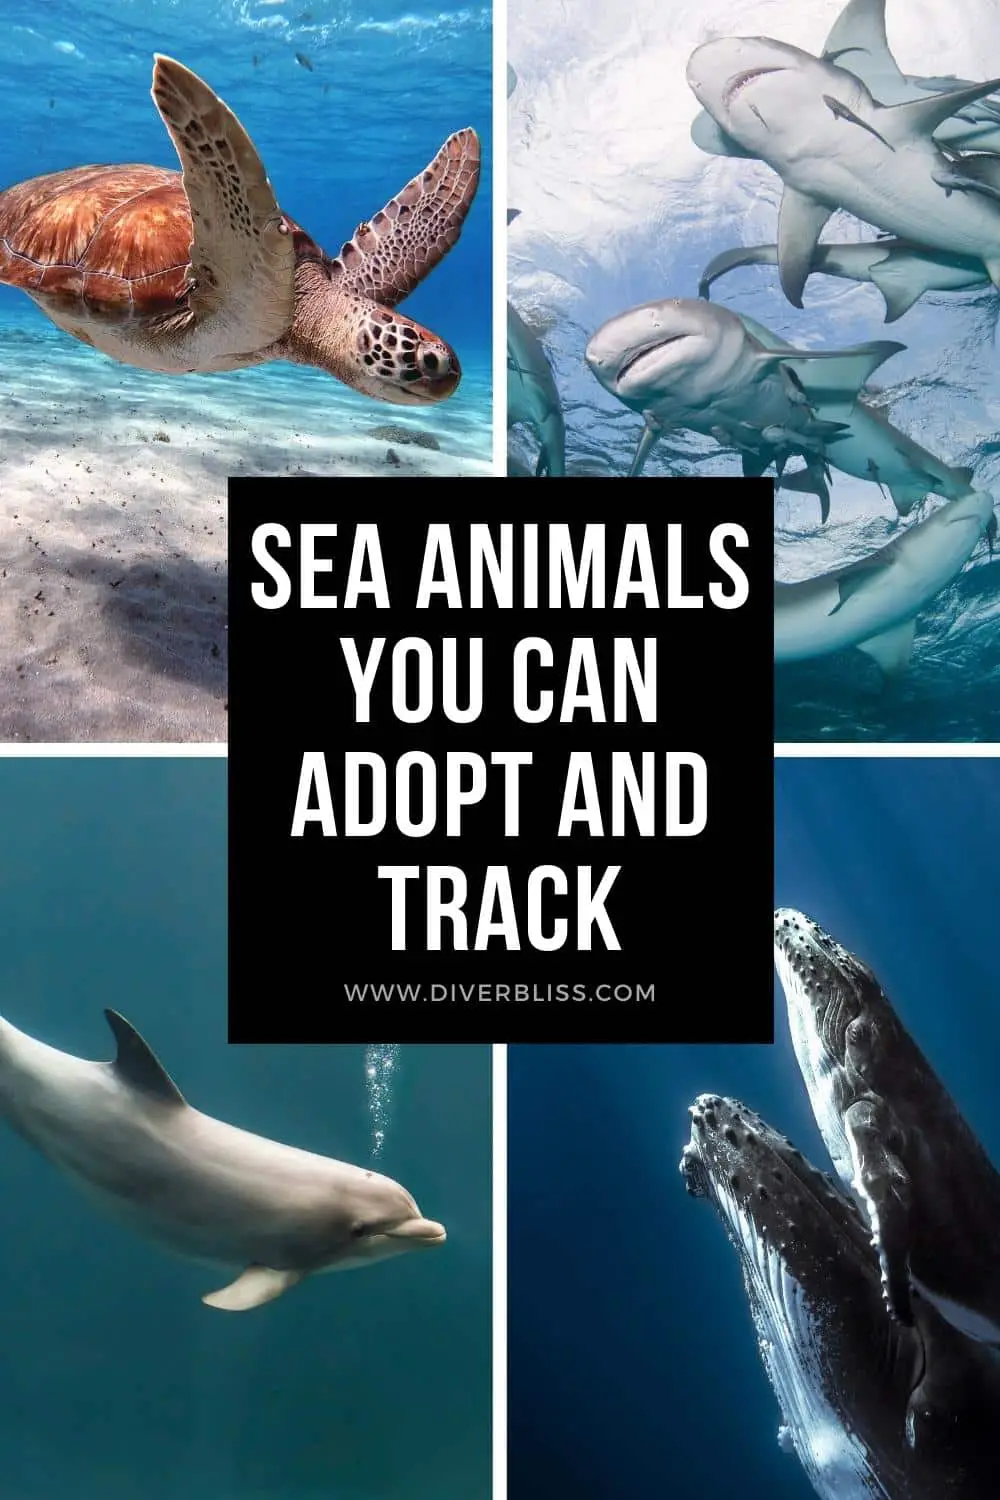 Sea animals you can adopt and track